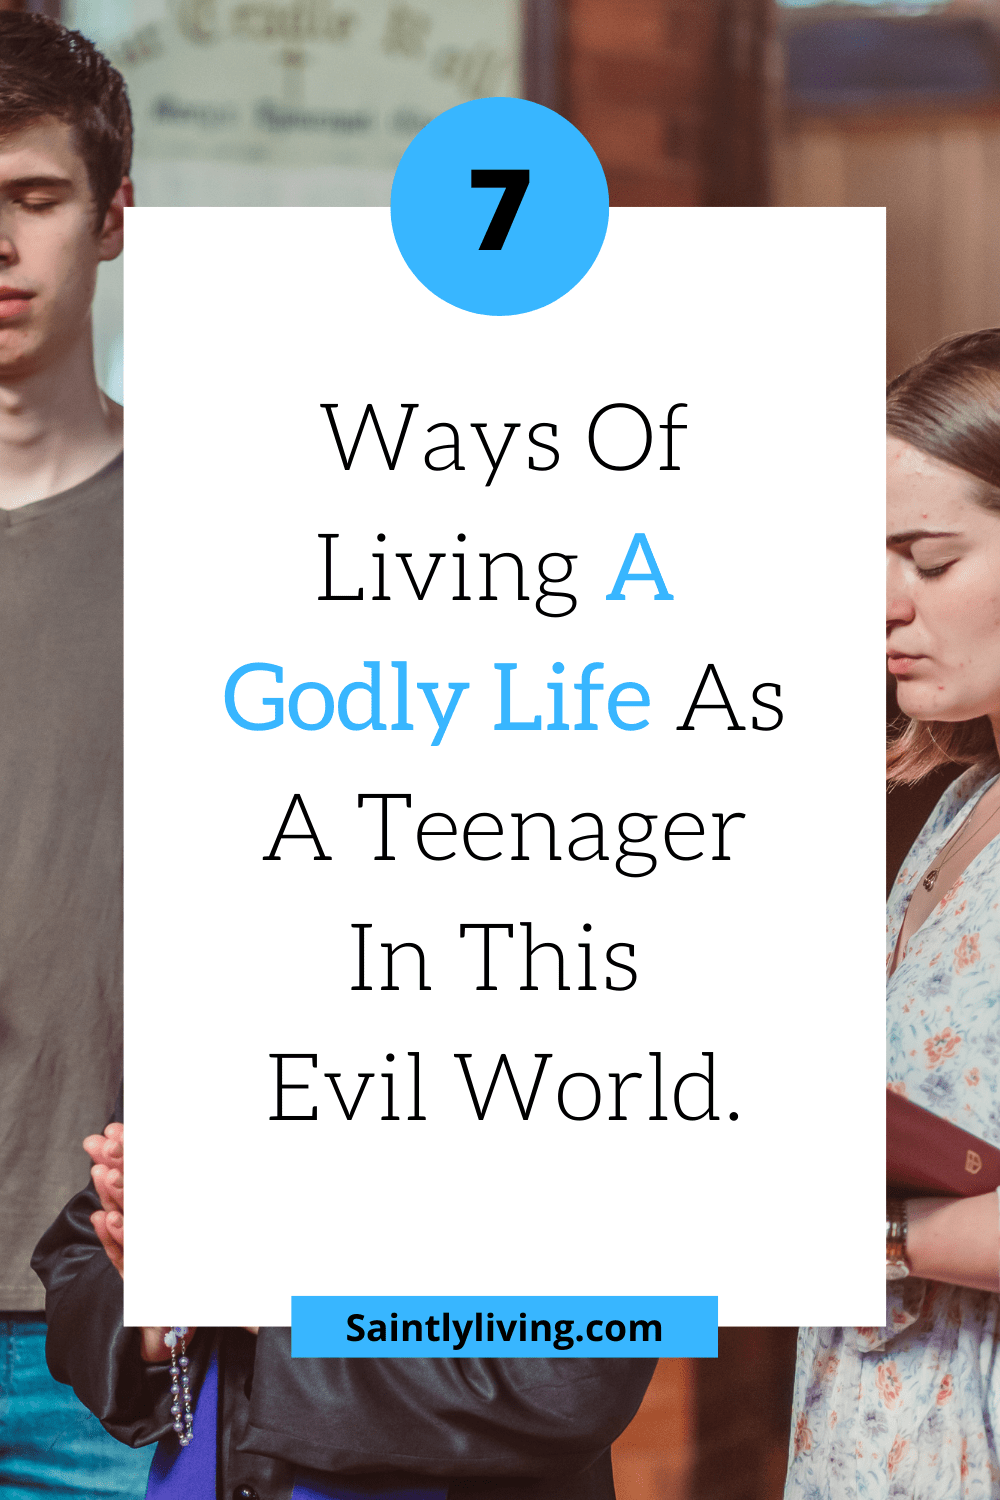 living-a-godly-life-as-a-teenager.